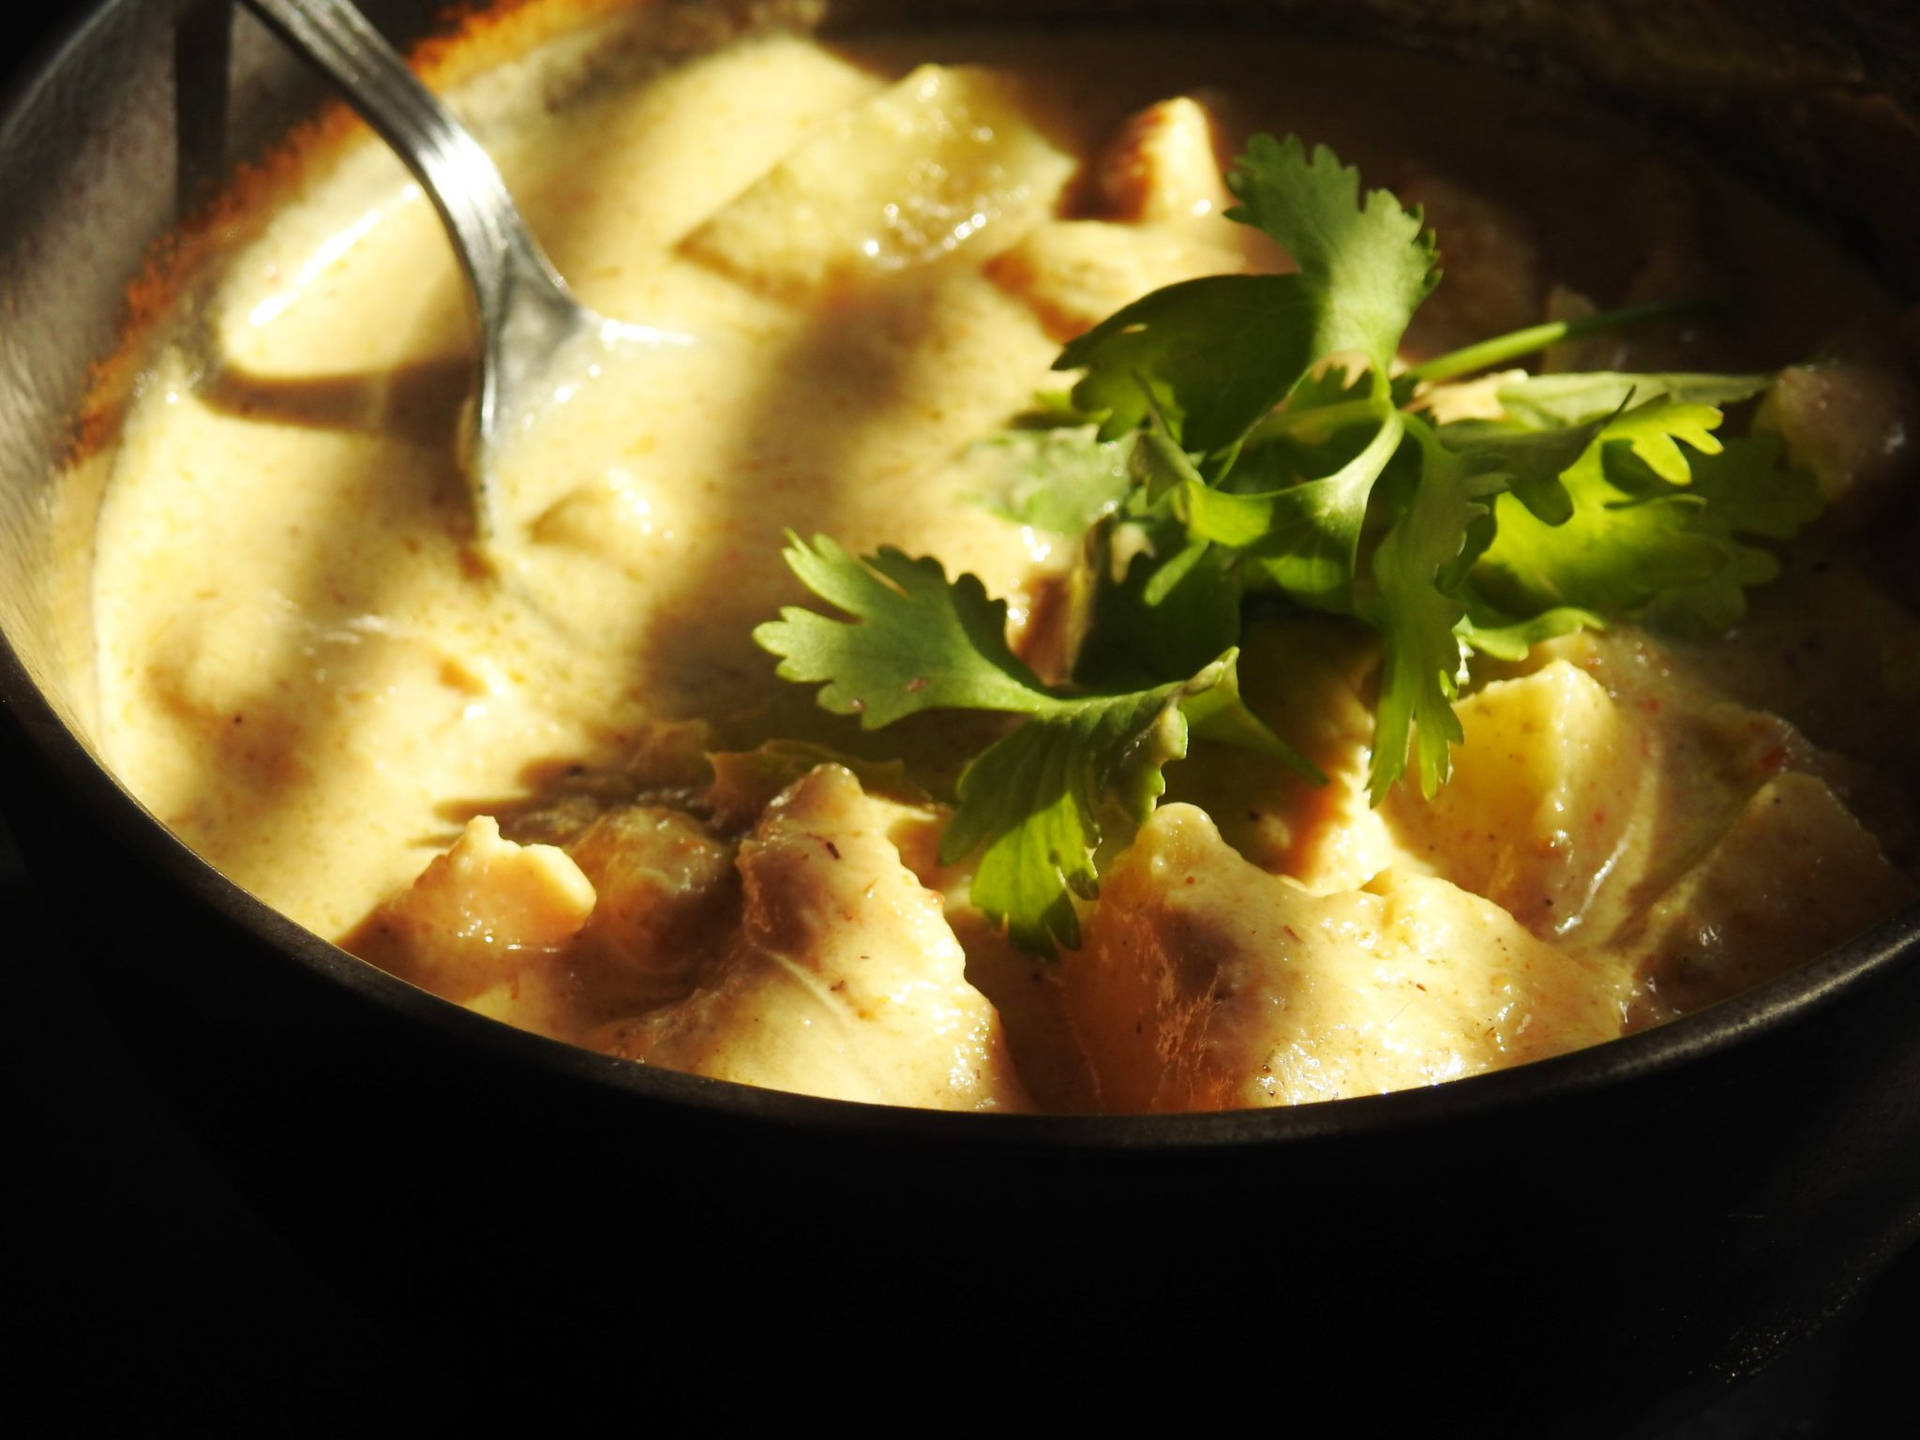 Yummy Thai Yellow Curry garnished with fresh coriander leaves. Wallpaper